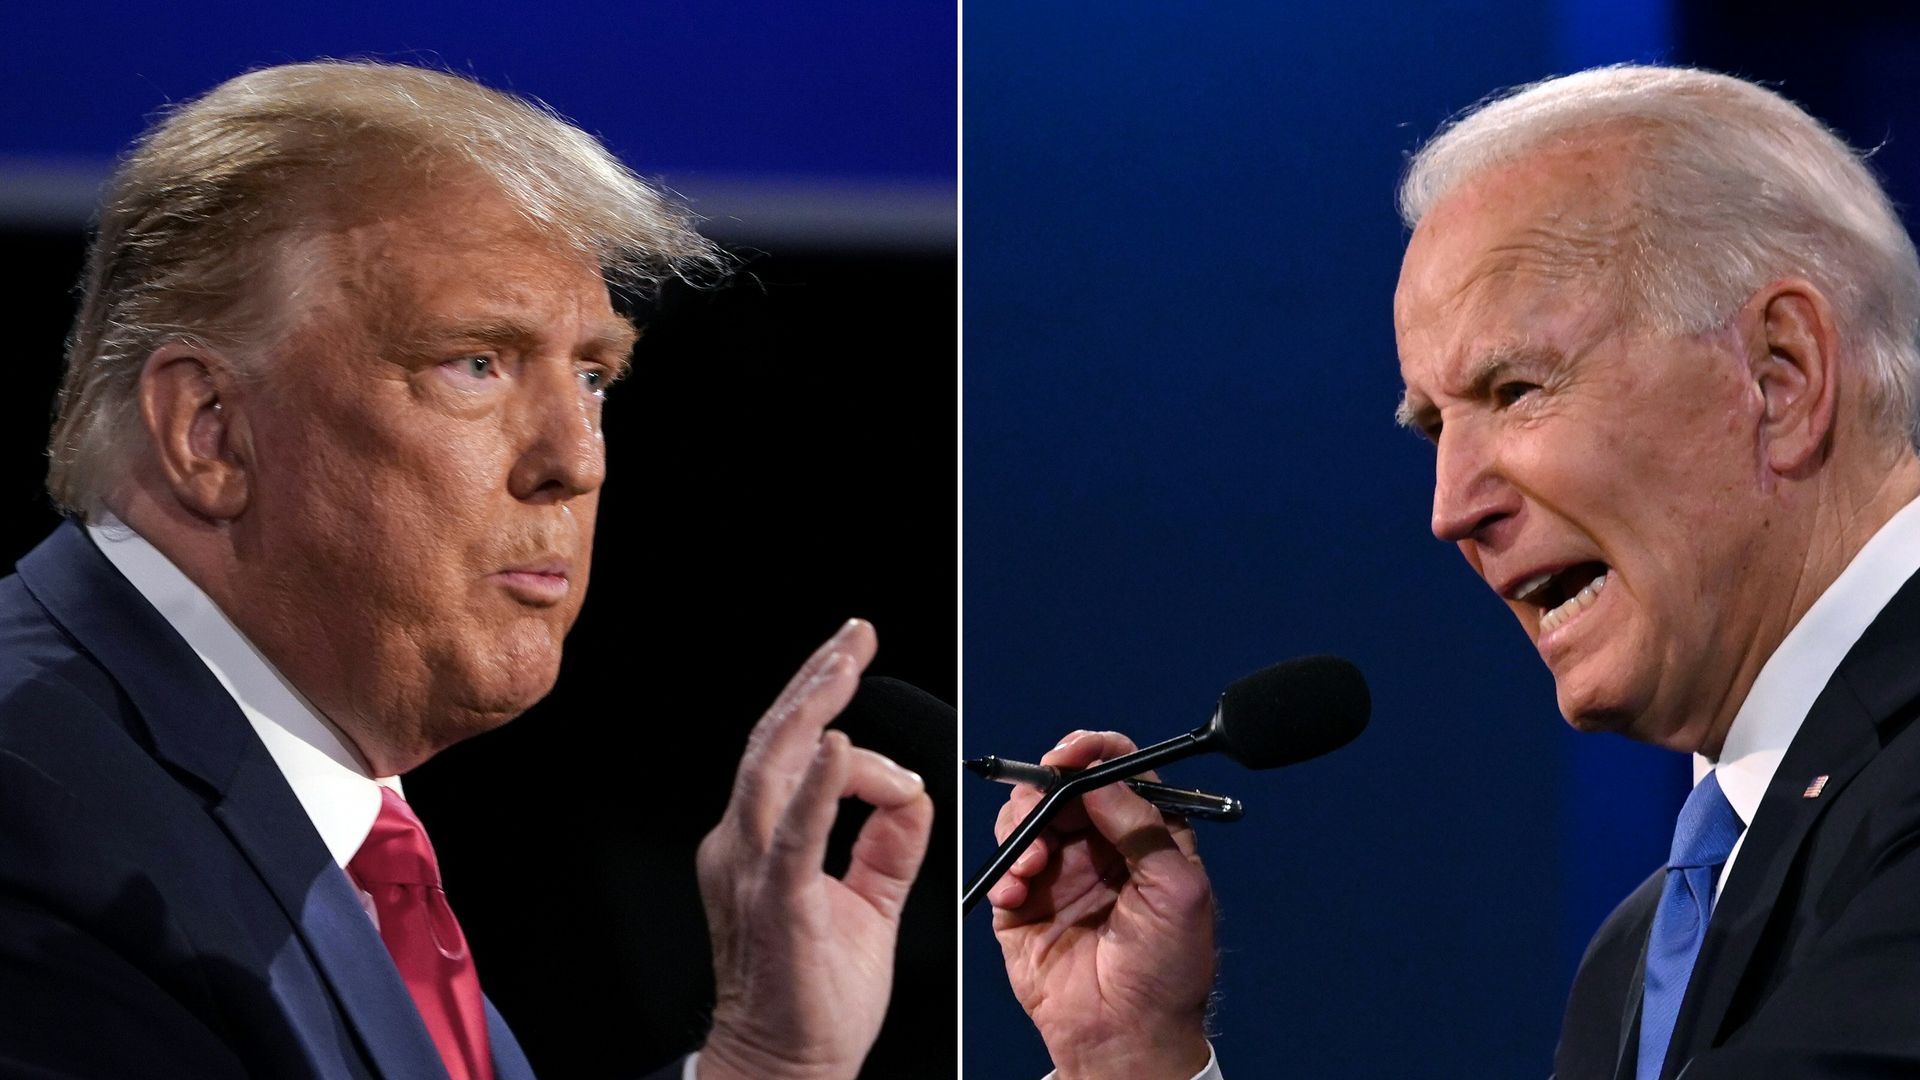 pust vandtæt gele Second terms for Biden, Trump "worst thing" for U.S., voters say in new poll